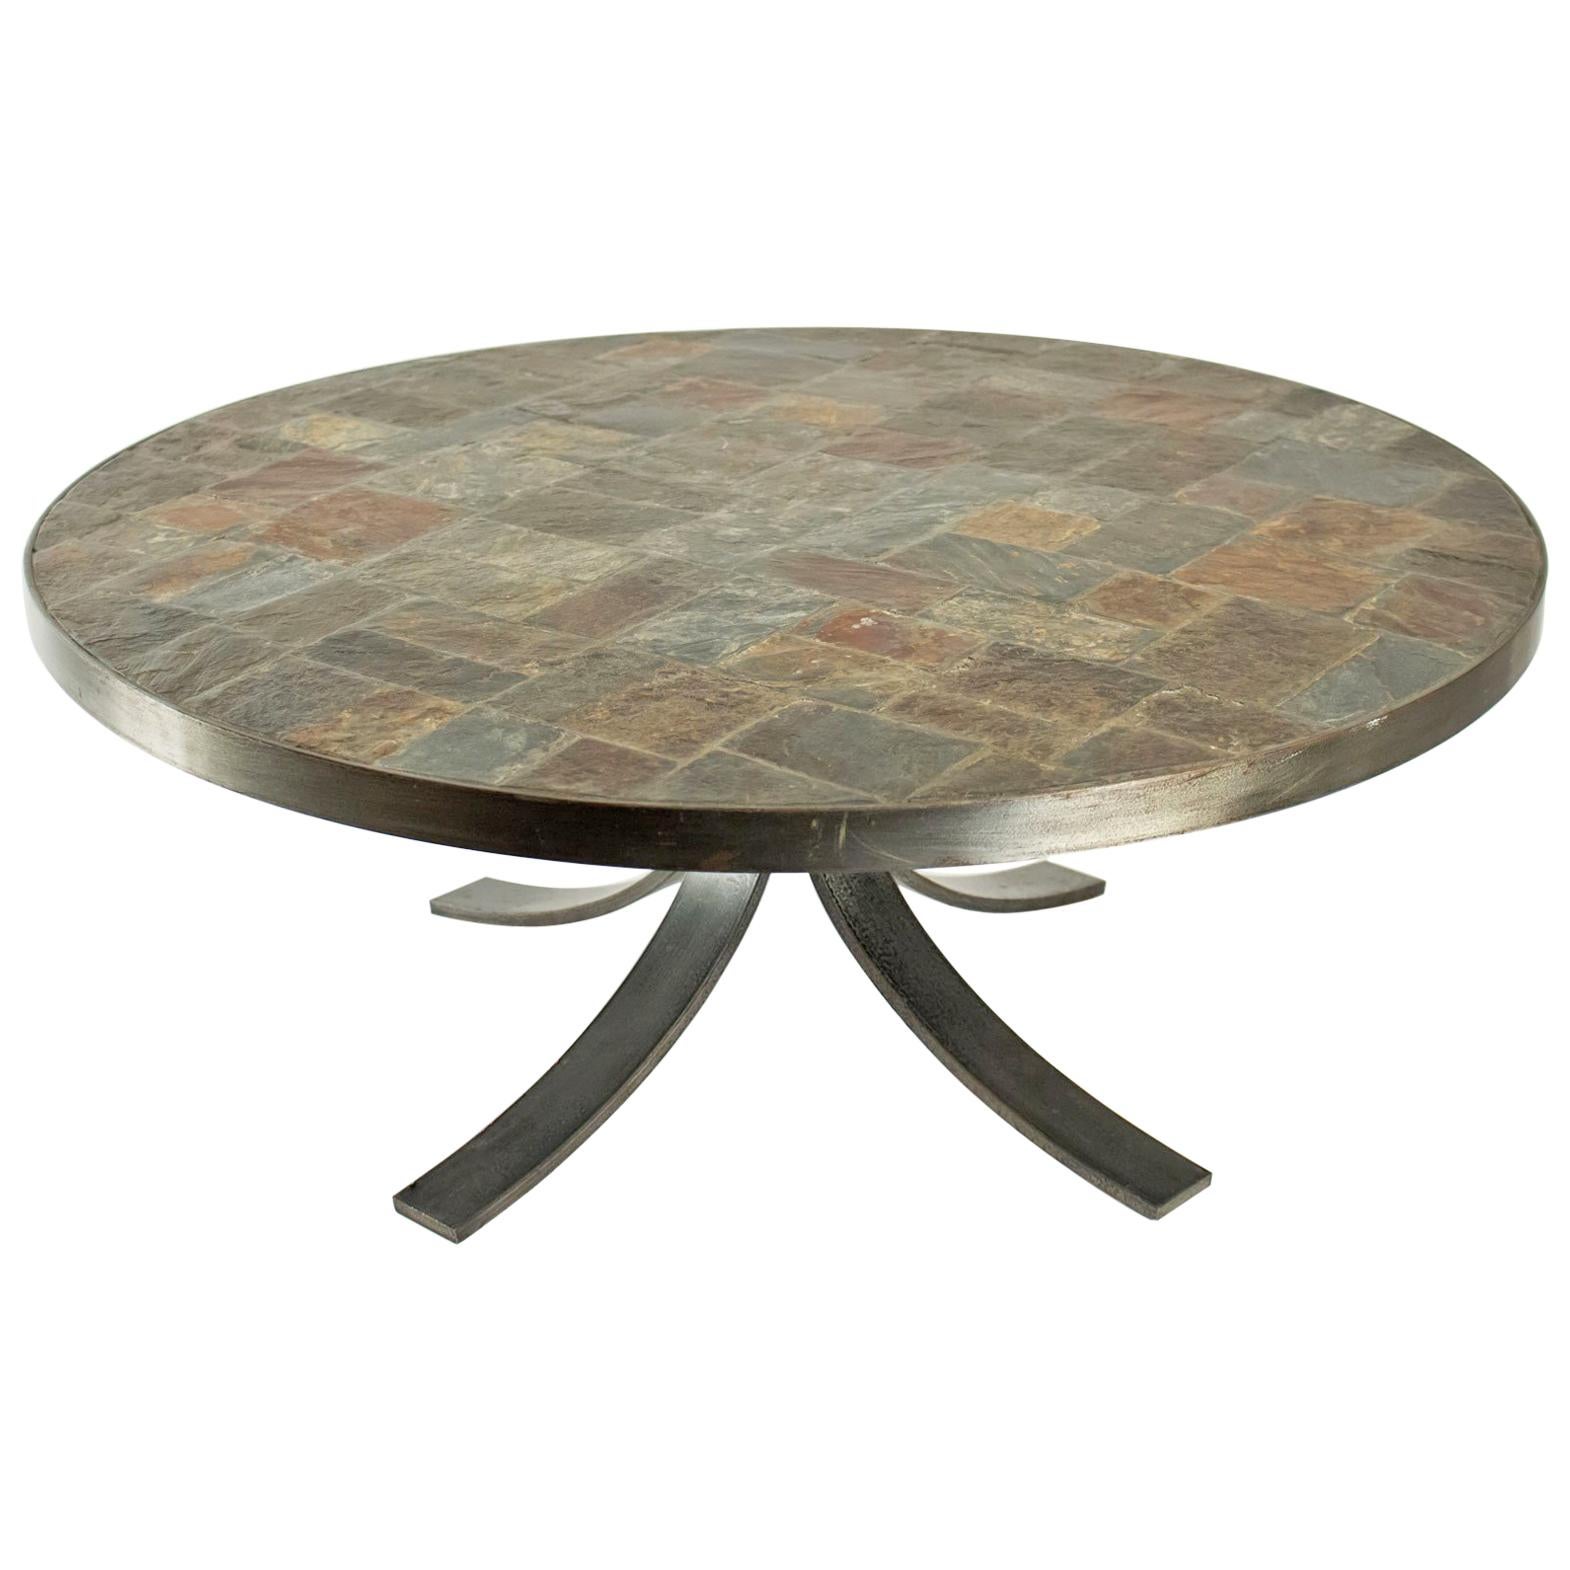 Round Coffee Table in Wrought Iron and Stone from the Ardoise, circa 1960-1970